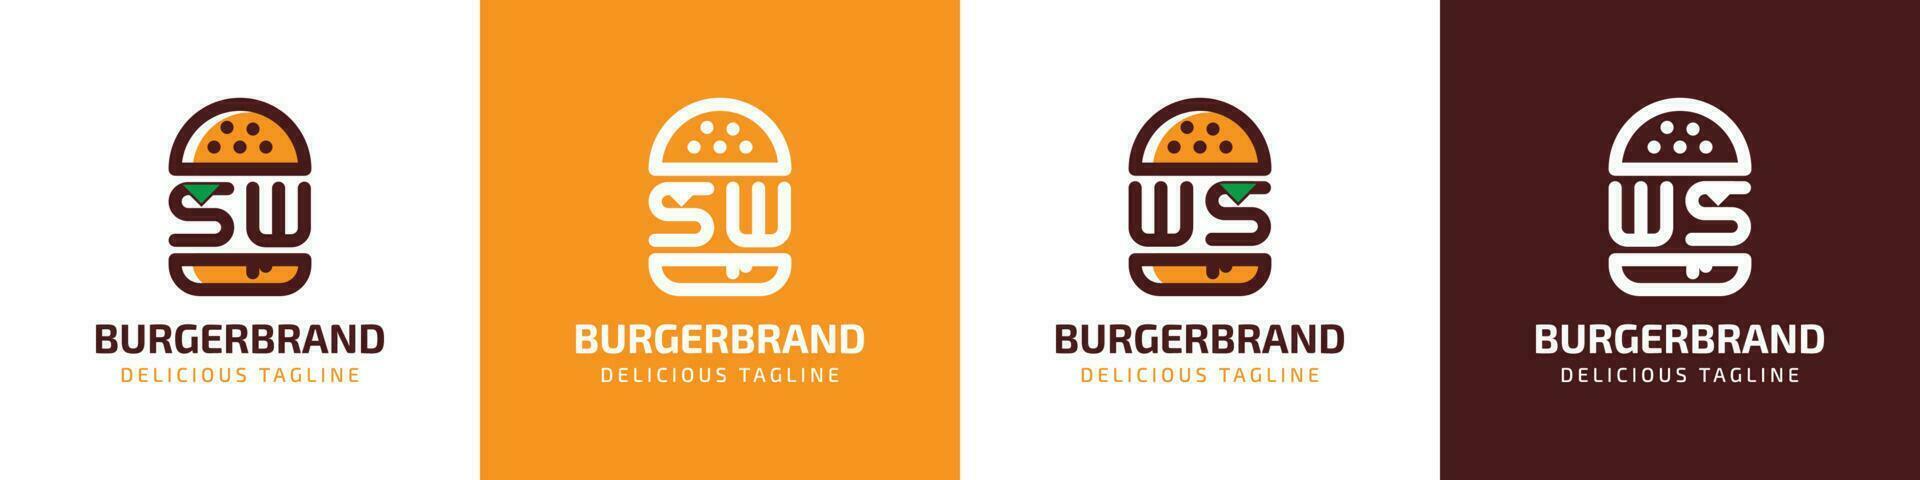 Letter SW and WS Burger Logo, suitable for any business related to burger with SW or WS initials. vector